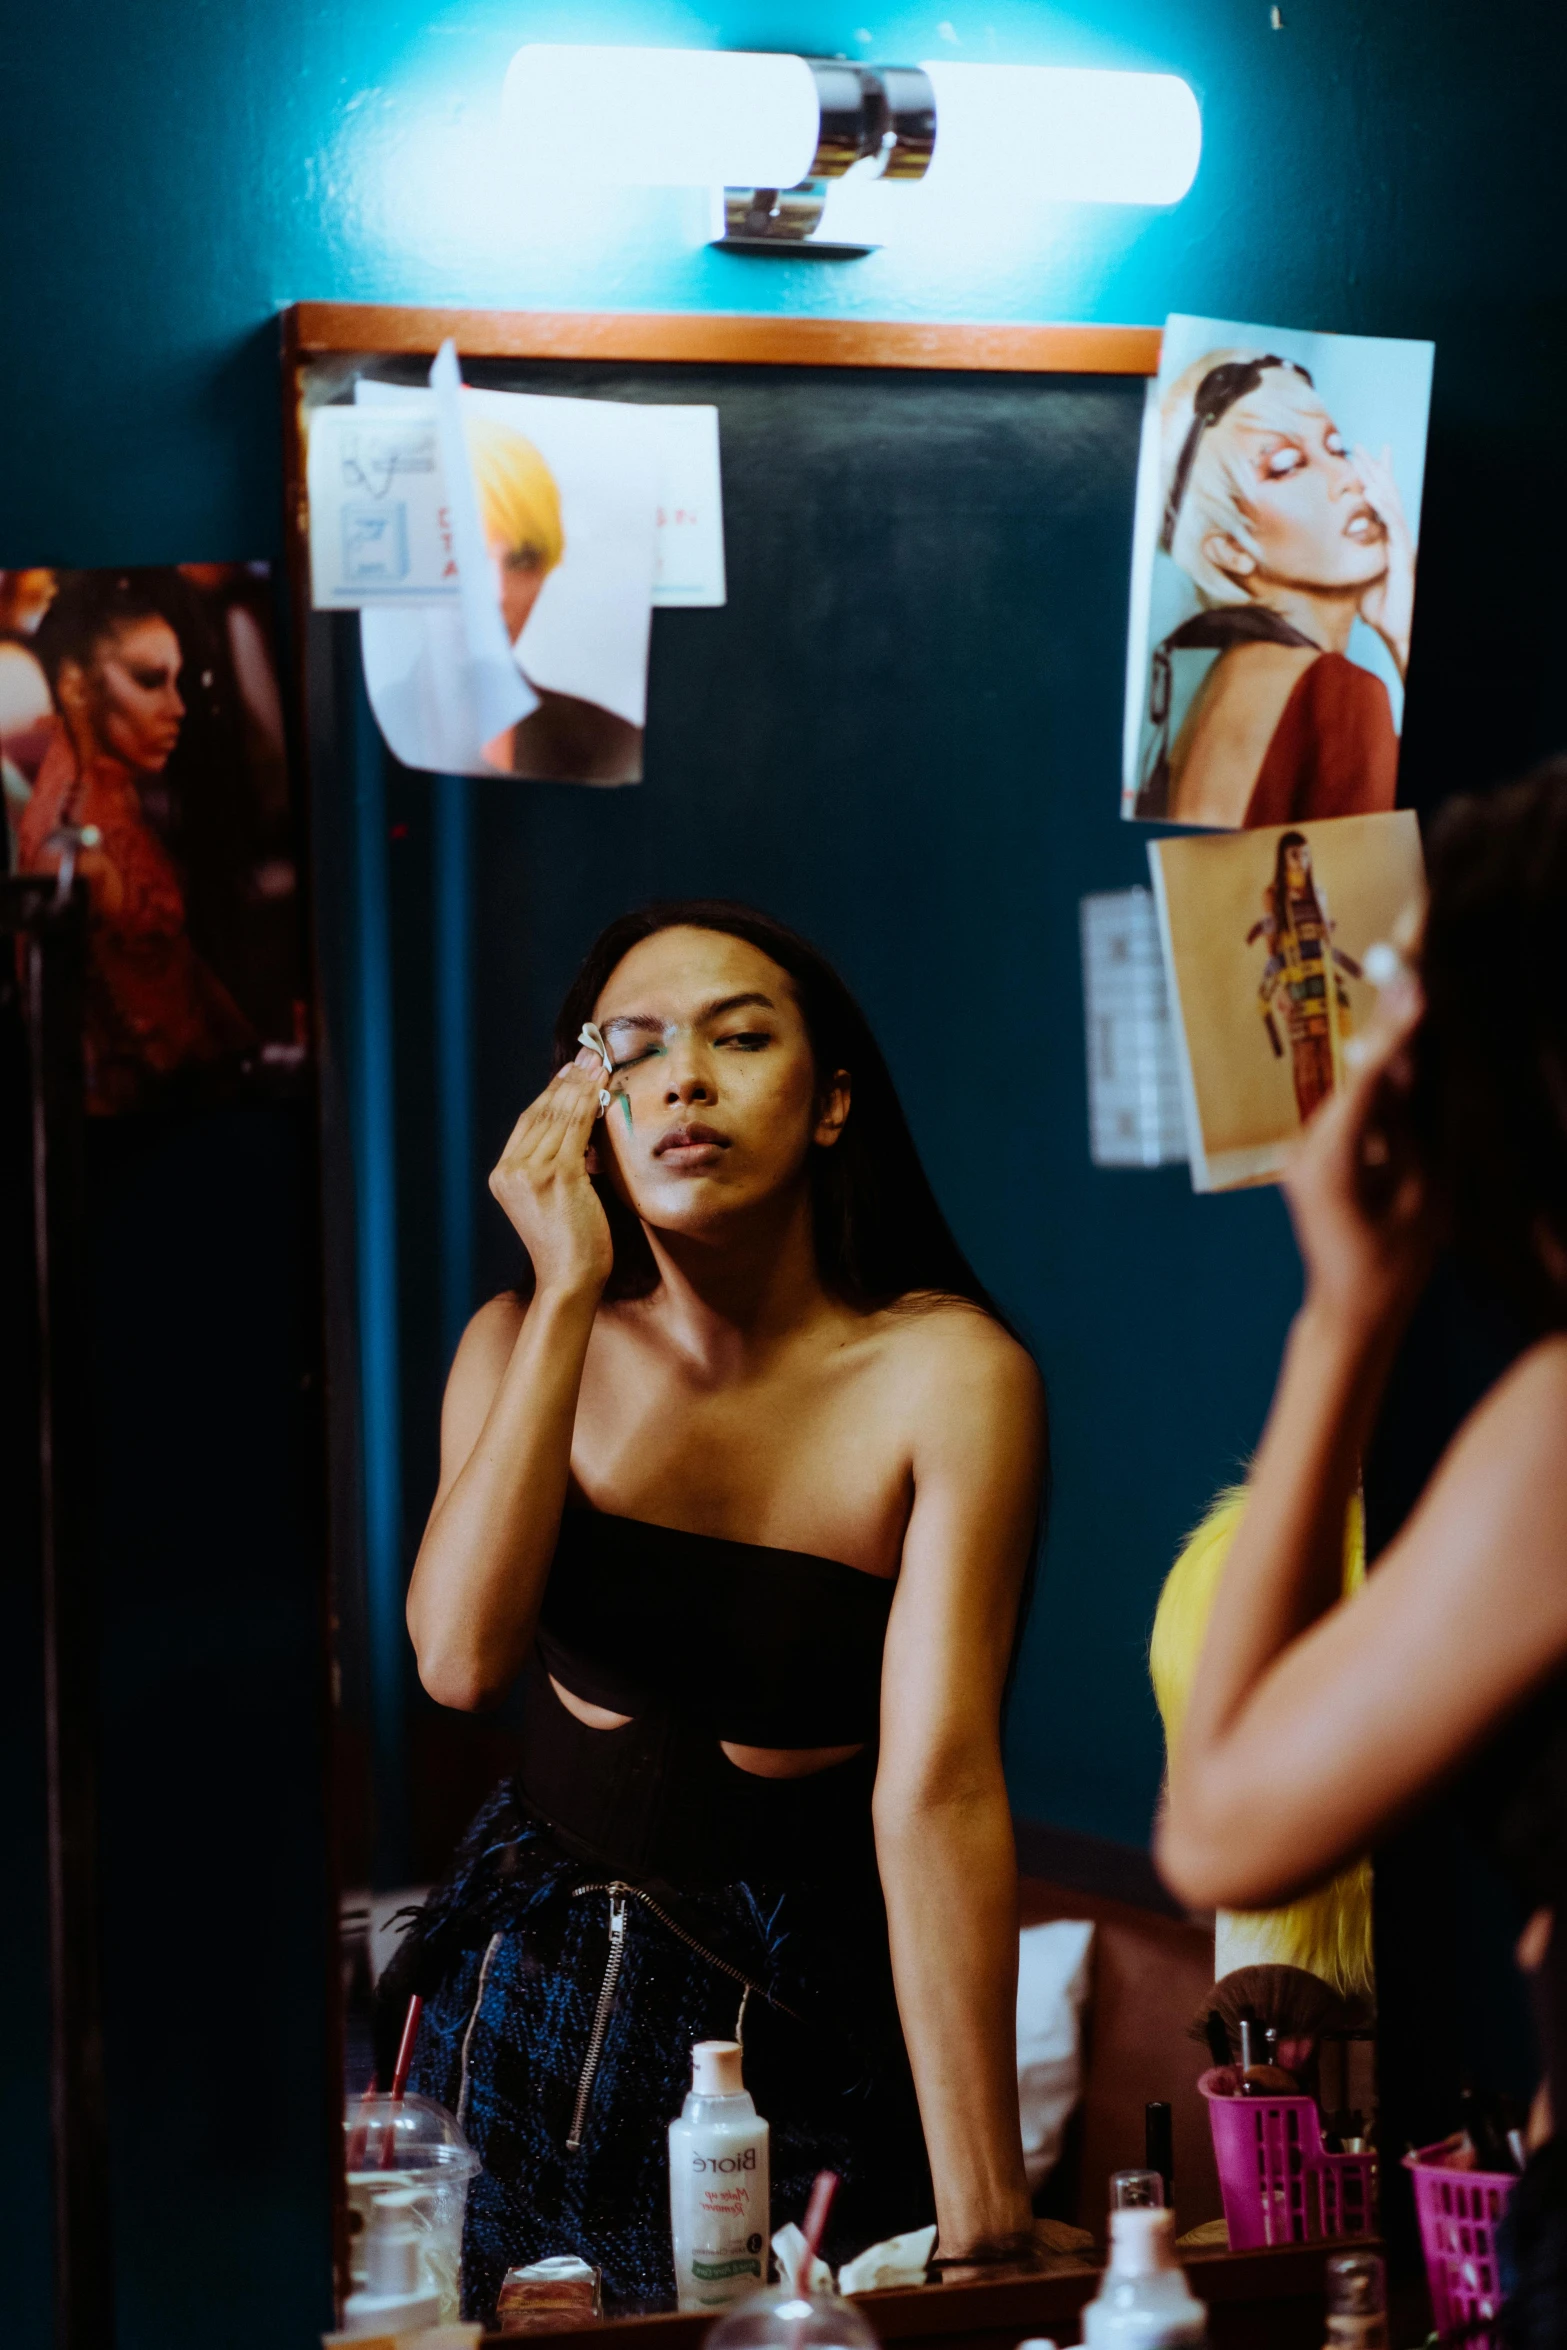 a woman standing in front of a mirror talking on a cell phone, a photo, trending on pexels, visual art, tessa thompson inspired, supermodel, putting makeup on, center of image